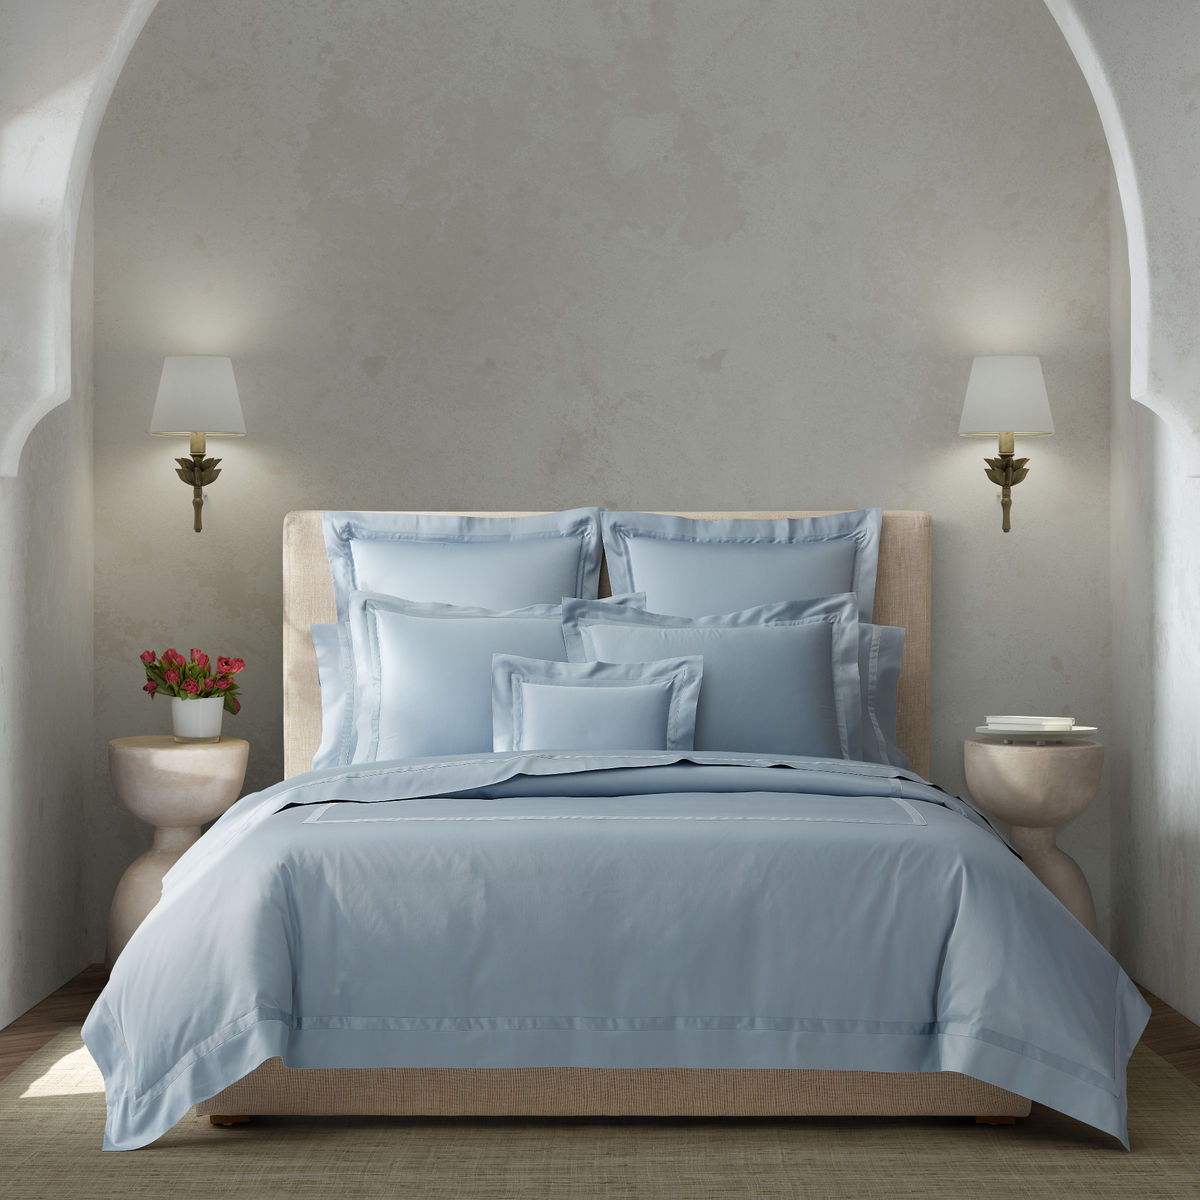 Full Bedding Dressed in Matouk Nocturne Collection Hazy Blue Color